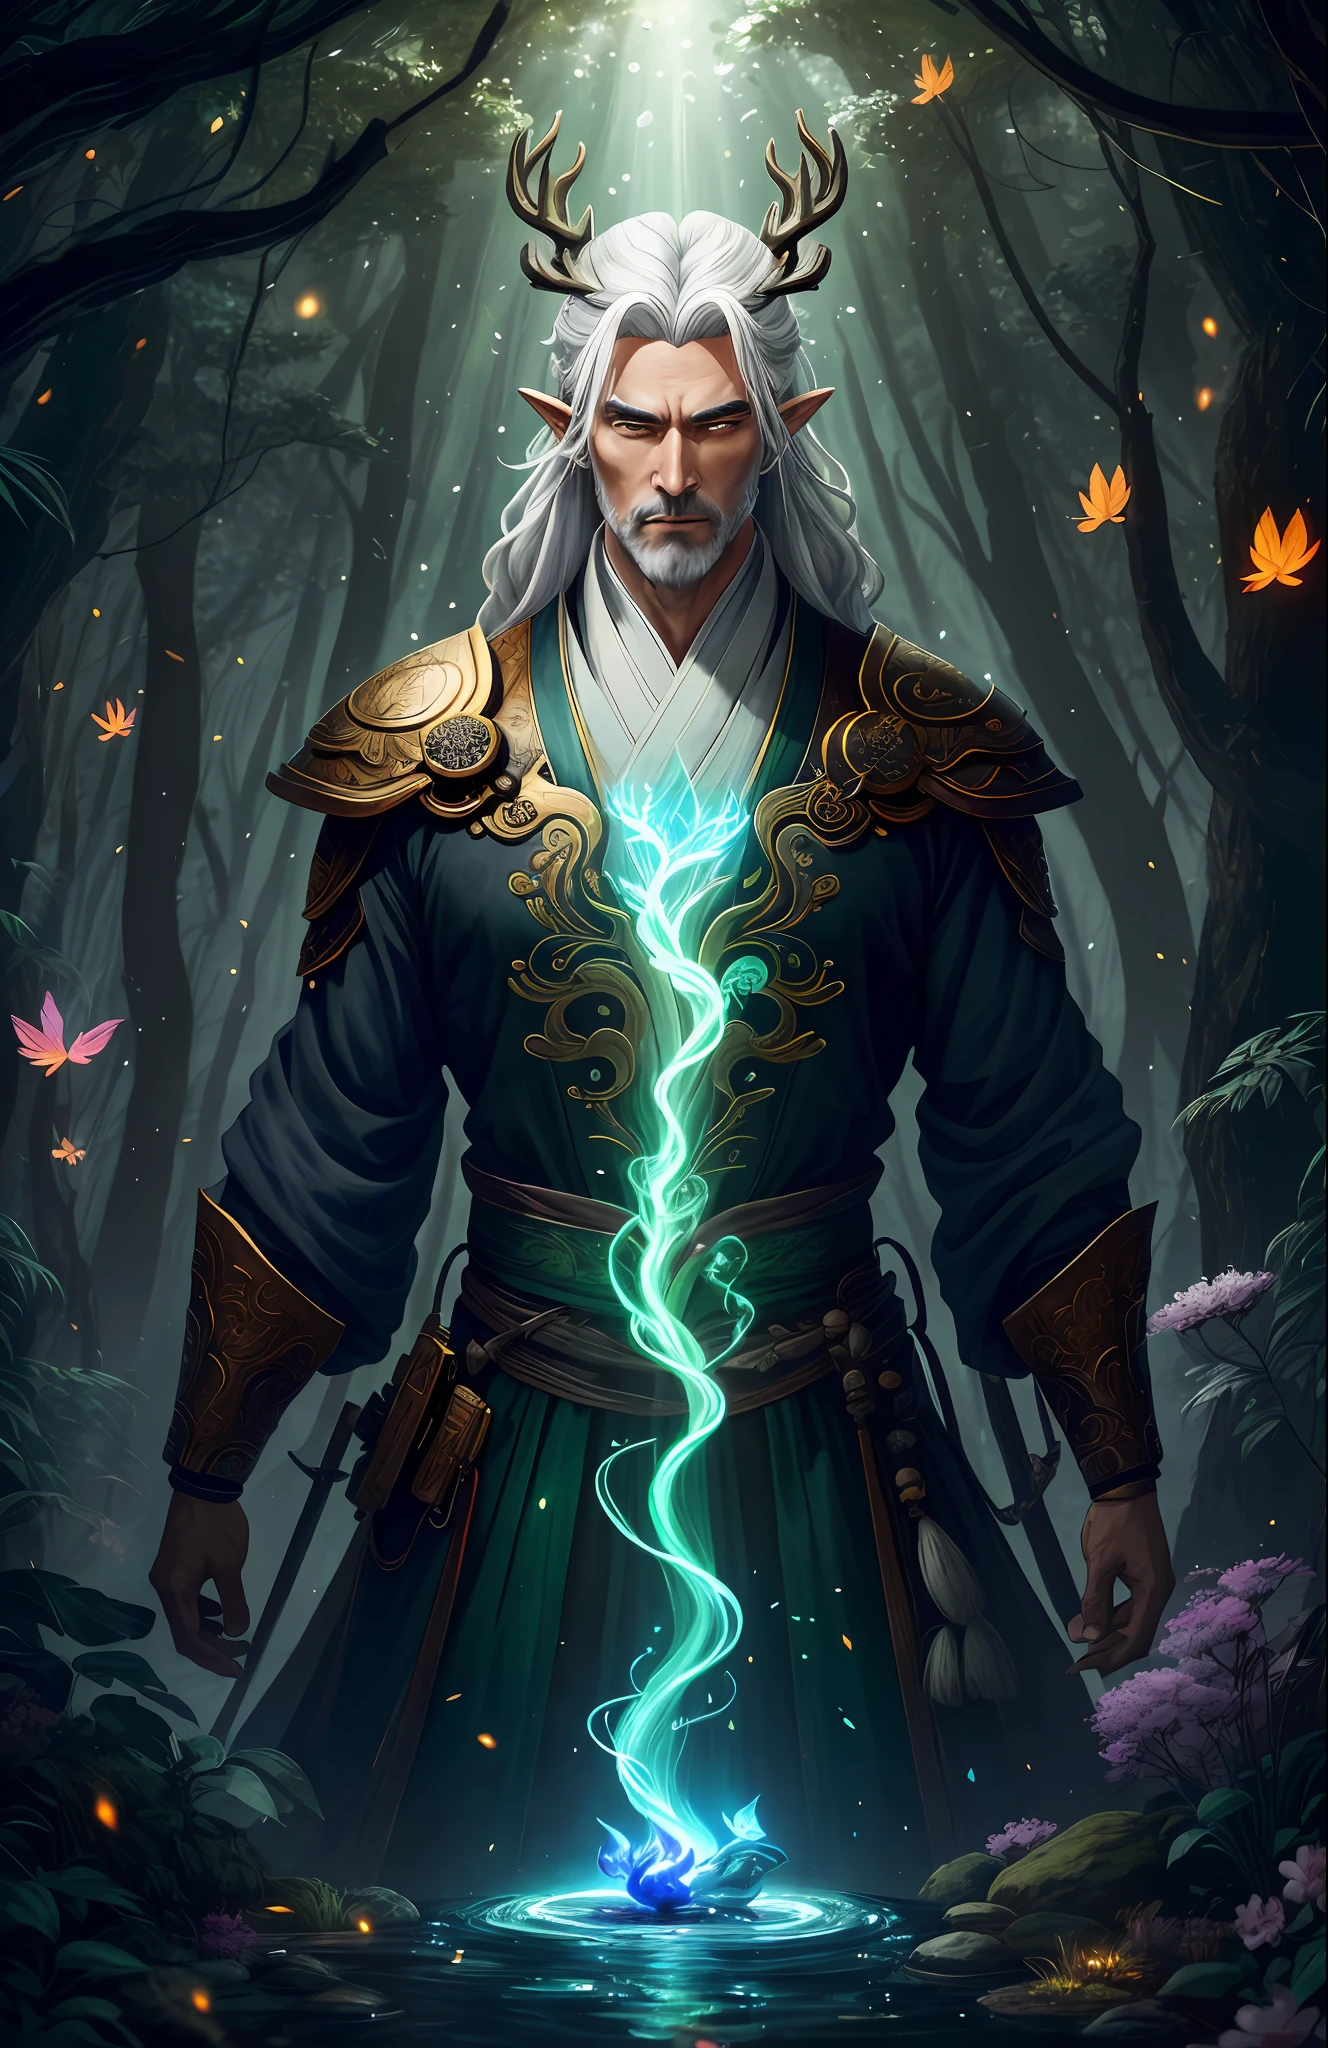 Masterpiece, best quality, (very detailed CG unified 8k wallpaper), (best quality), (best illustration), (best shadow), close-up of a man with white hair and white mask, beautiful figure painting, Guviz, Guvitz style artwork, white-haired god, Yang J, epic exquisite character art, amazing character art, Fan Qi, Wu Zhun Shifan, Guvitz in pixiv art station, glowing elf, with a glowing deer, drinking water in the pool, Natural elements in forest theme. Mysterious forest, beautiful forest, nature, surrounded by flowers, delicate leaves and branches surrounded by fireflies (natural elements), (jungle theme), (leaves), (branches), (fireflies), (particle effects) and other 3D, Octane rendering, ray tracing, super detailed